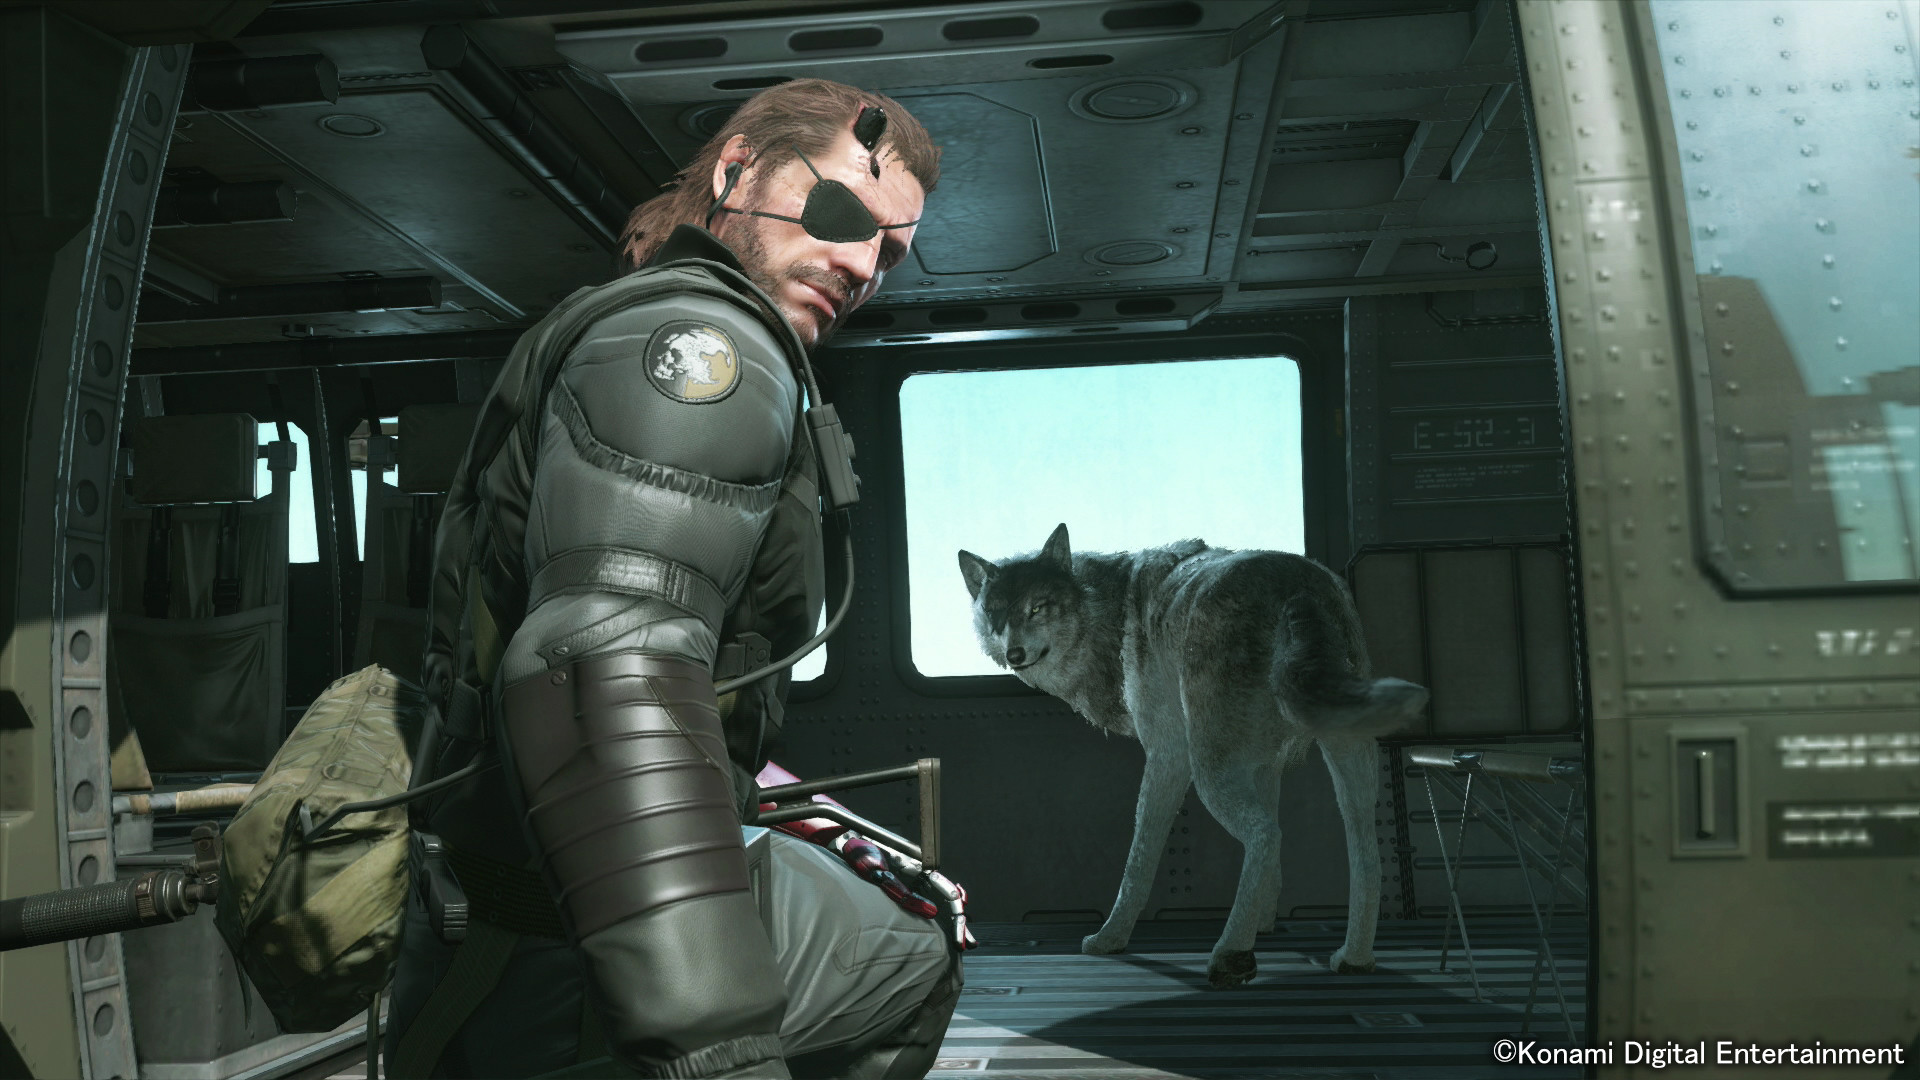 Metal Gear Solid V: The Phantom Pain Review Roundup